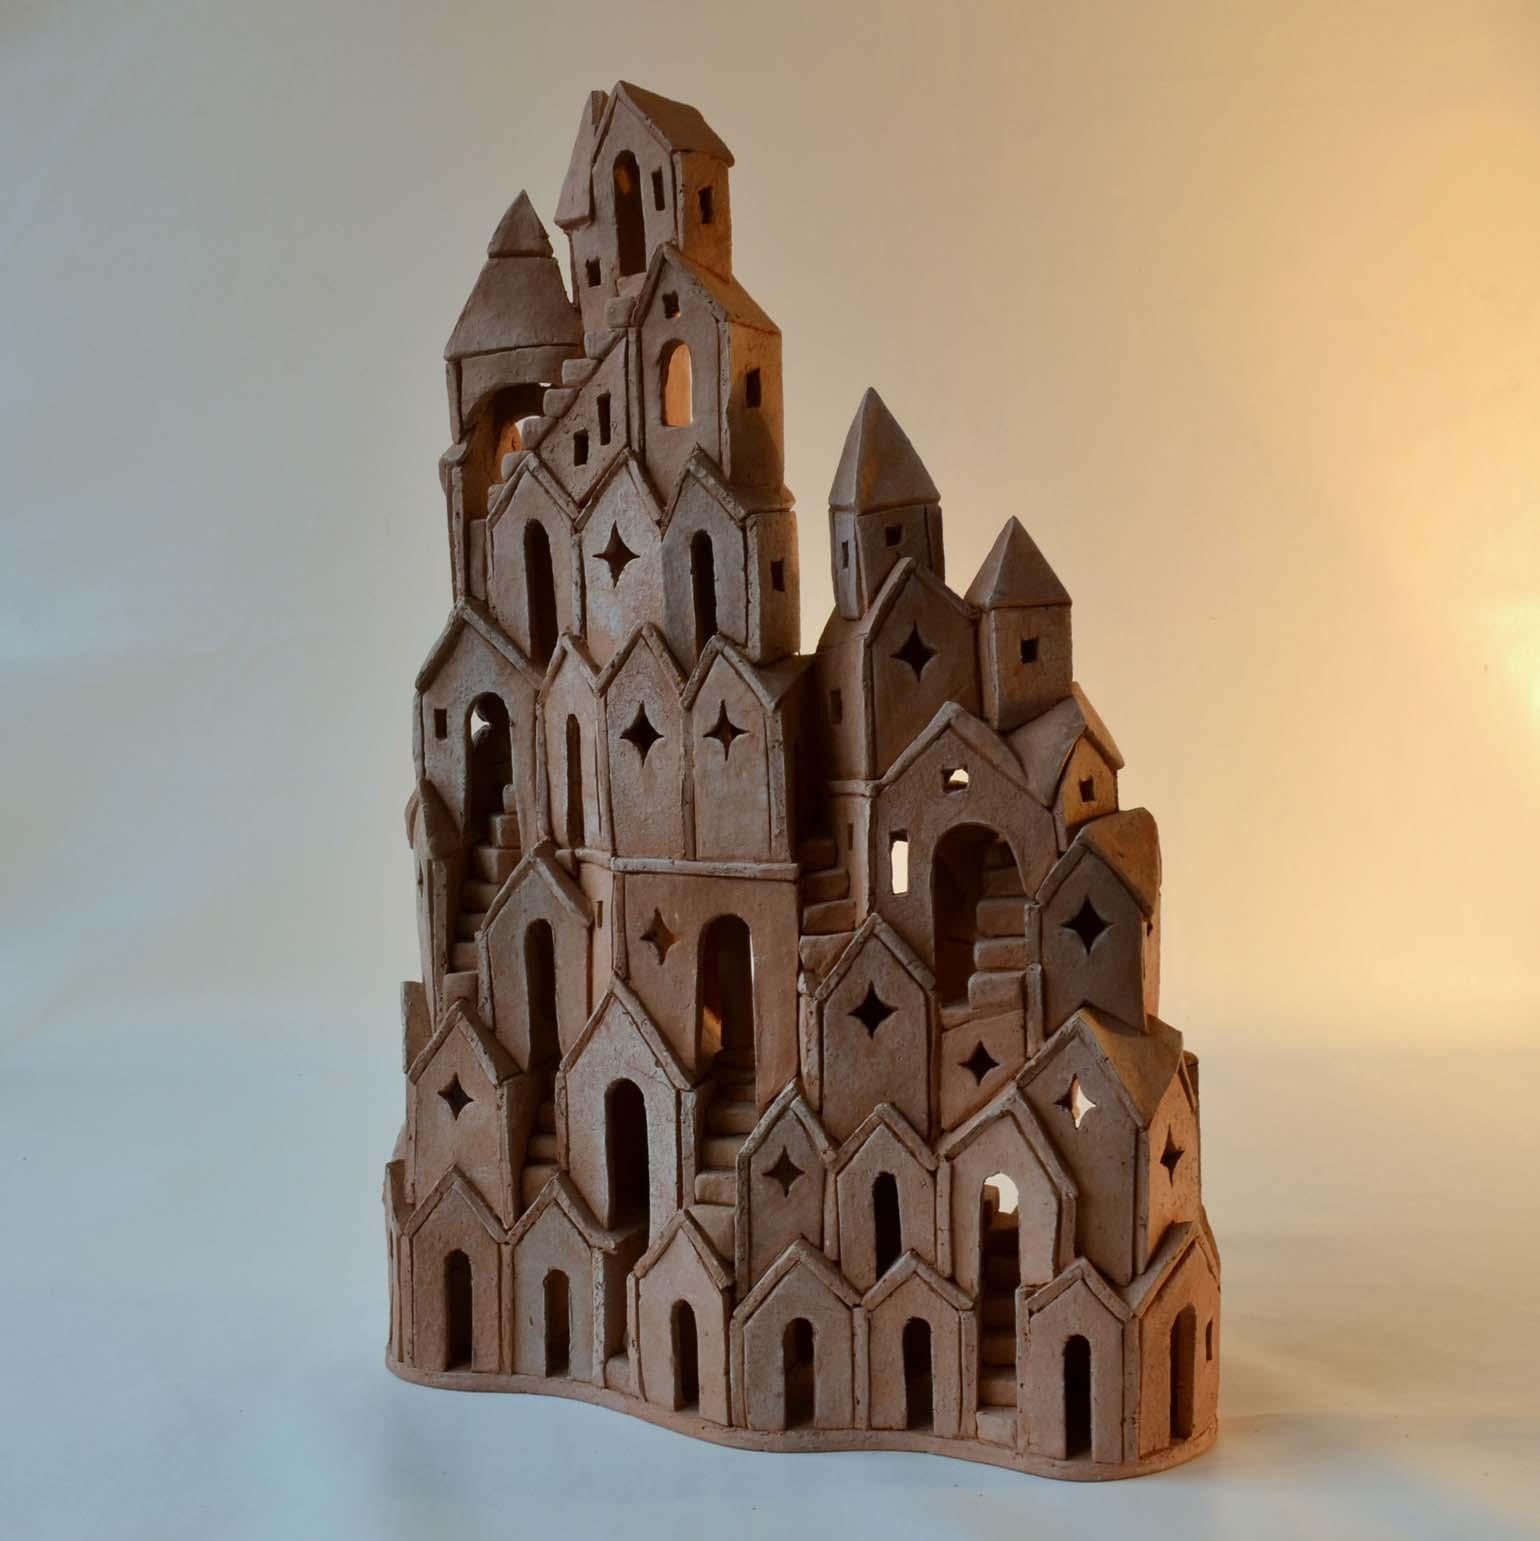 Architectural Surreal Ceramic Tower Sculpture 2 by Dutch Arie Bouter 1995 2